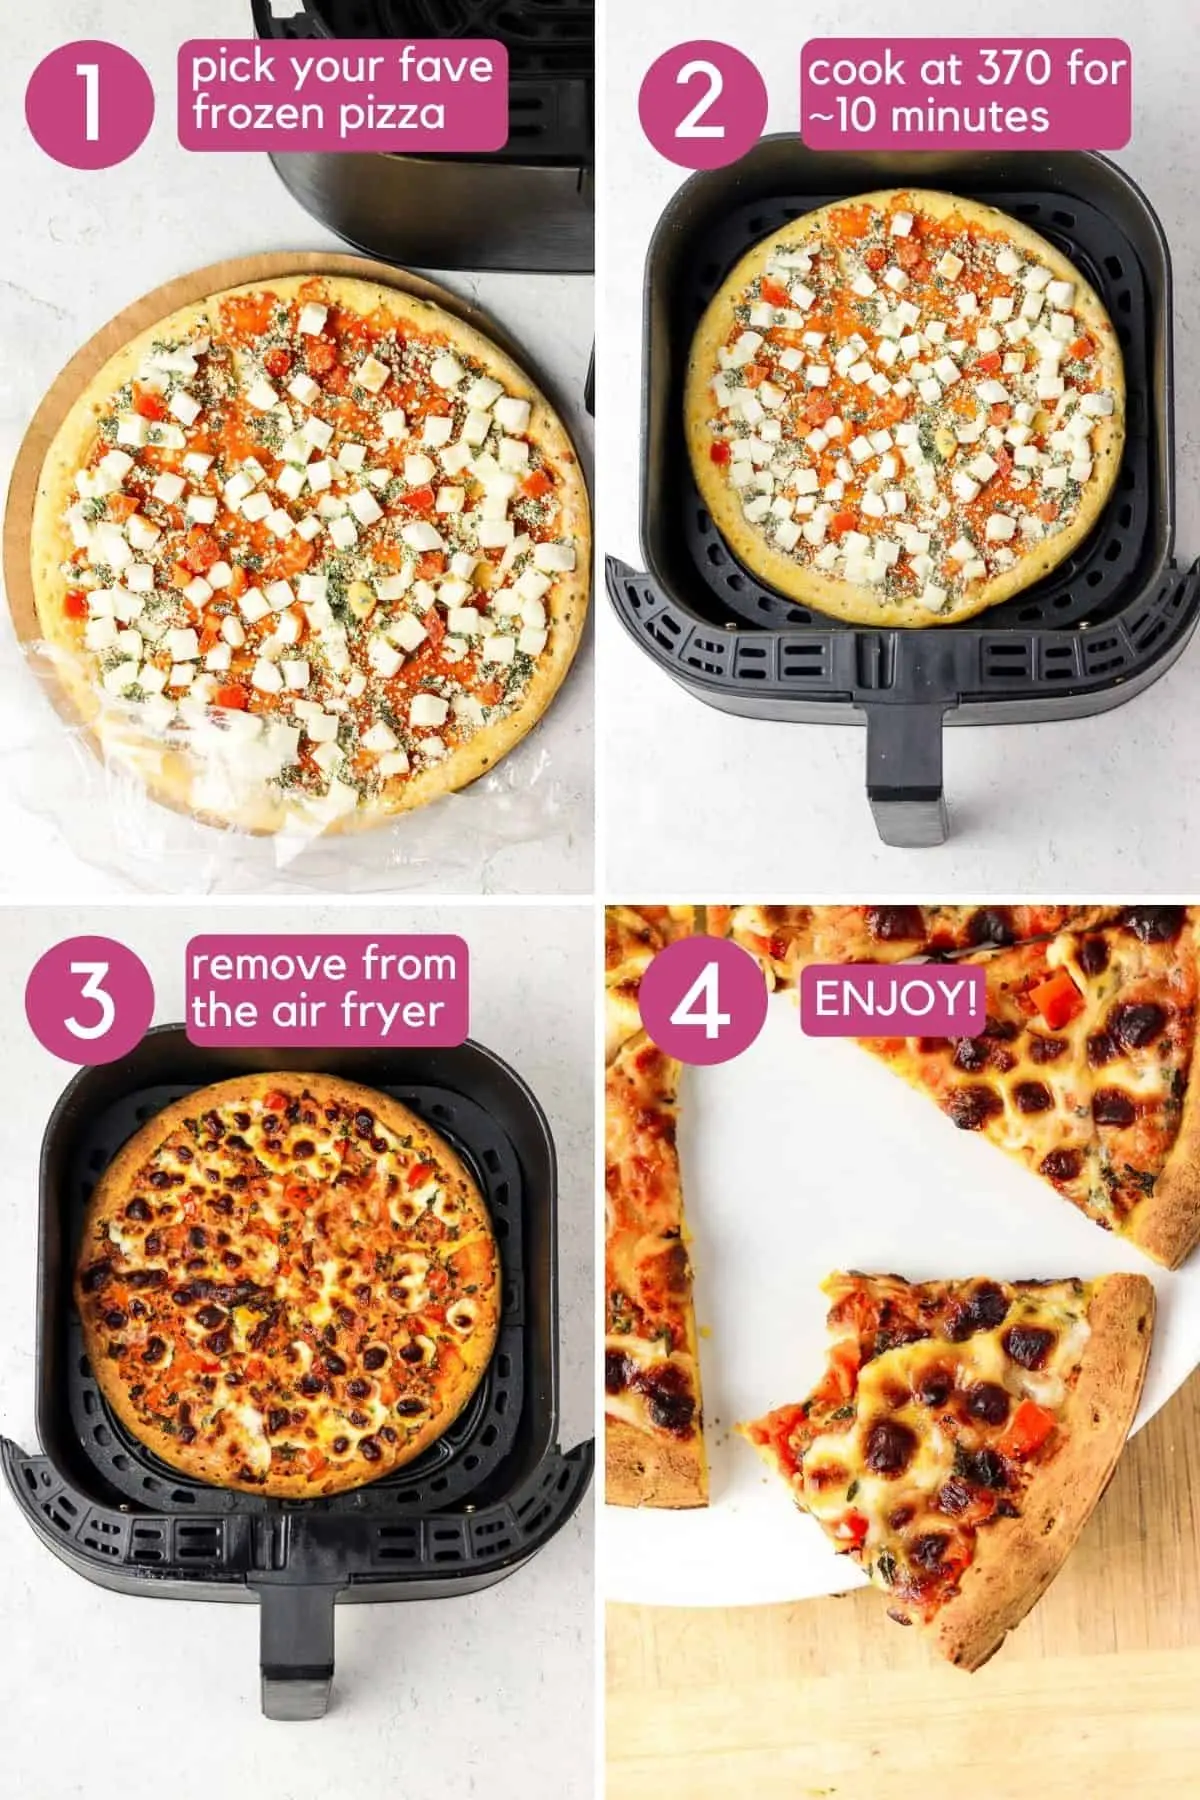 can you do pizza in air fryer - Can you put pizza bites in an air fryer